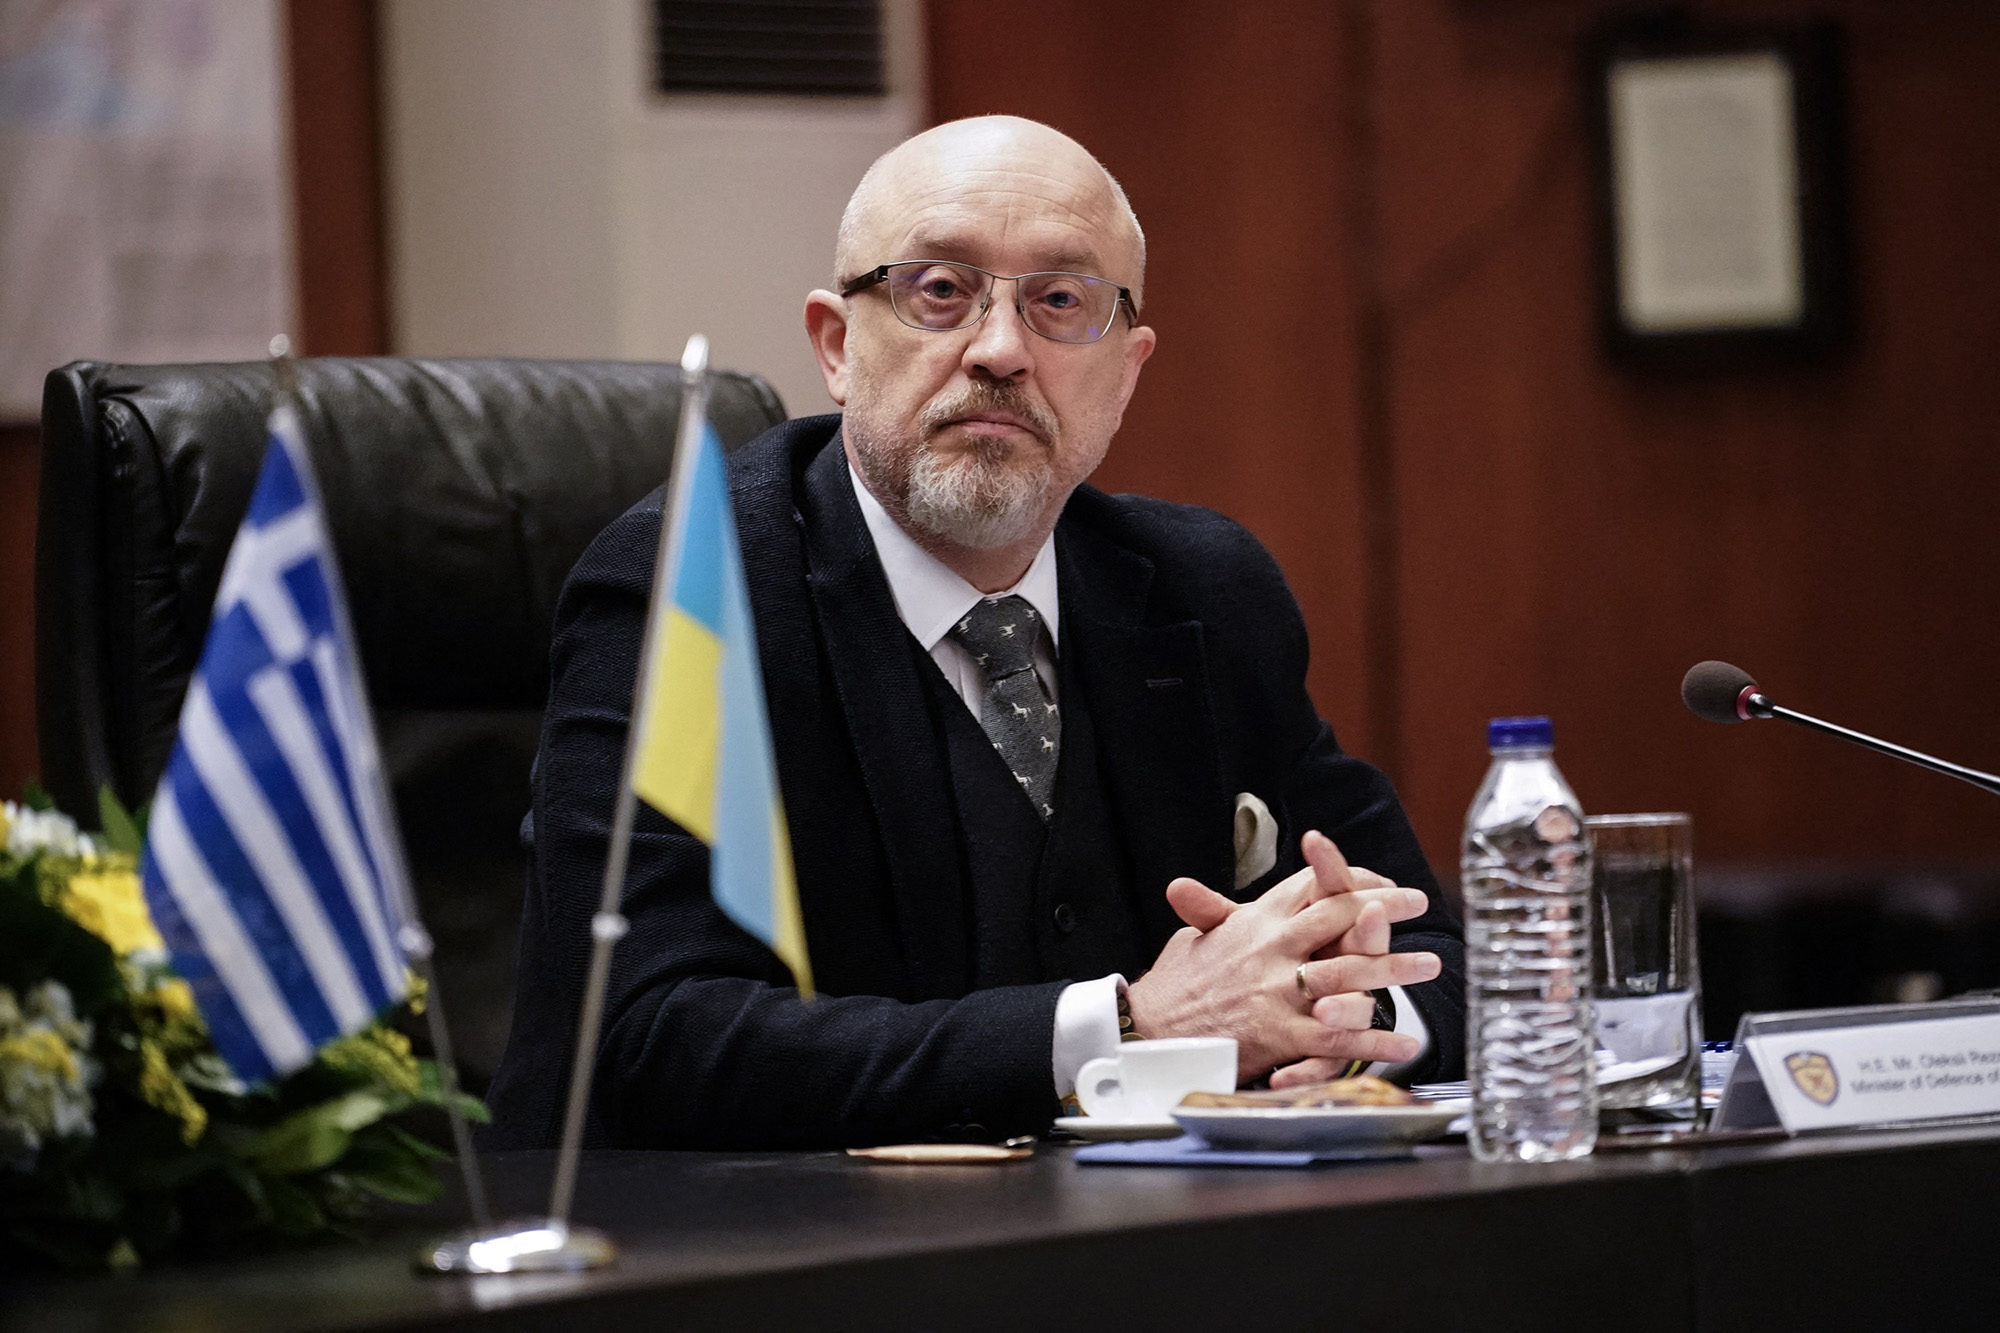 Ukraine's Minister of Defence Oleksii Reznikov during his meeting with his Greek counterpart Nikos Panagiotopoulos, in Athens, Greece, on April 6.